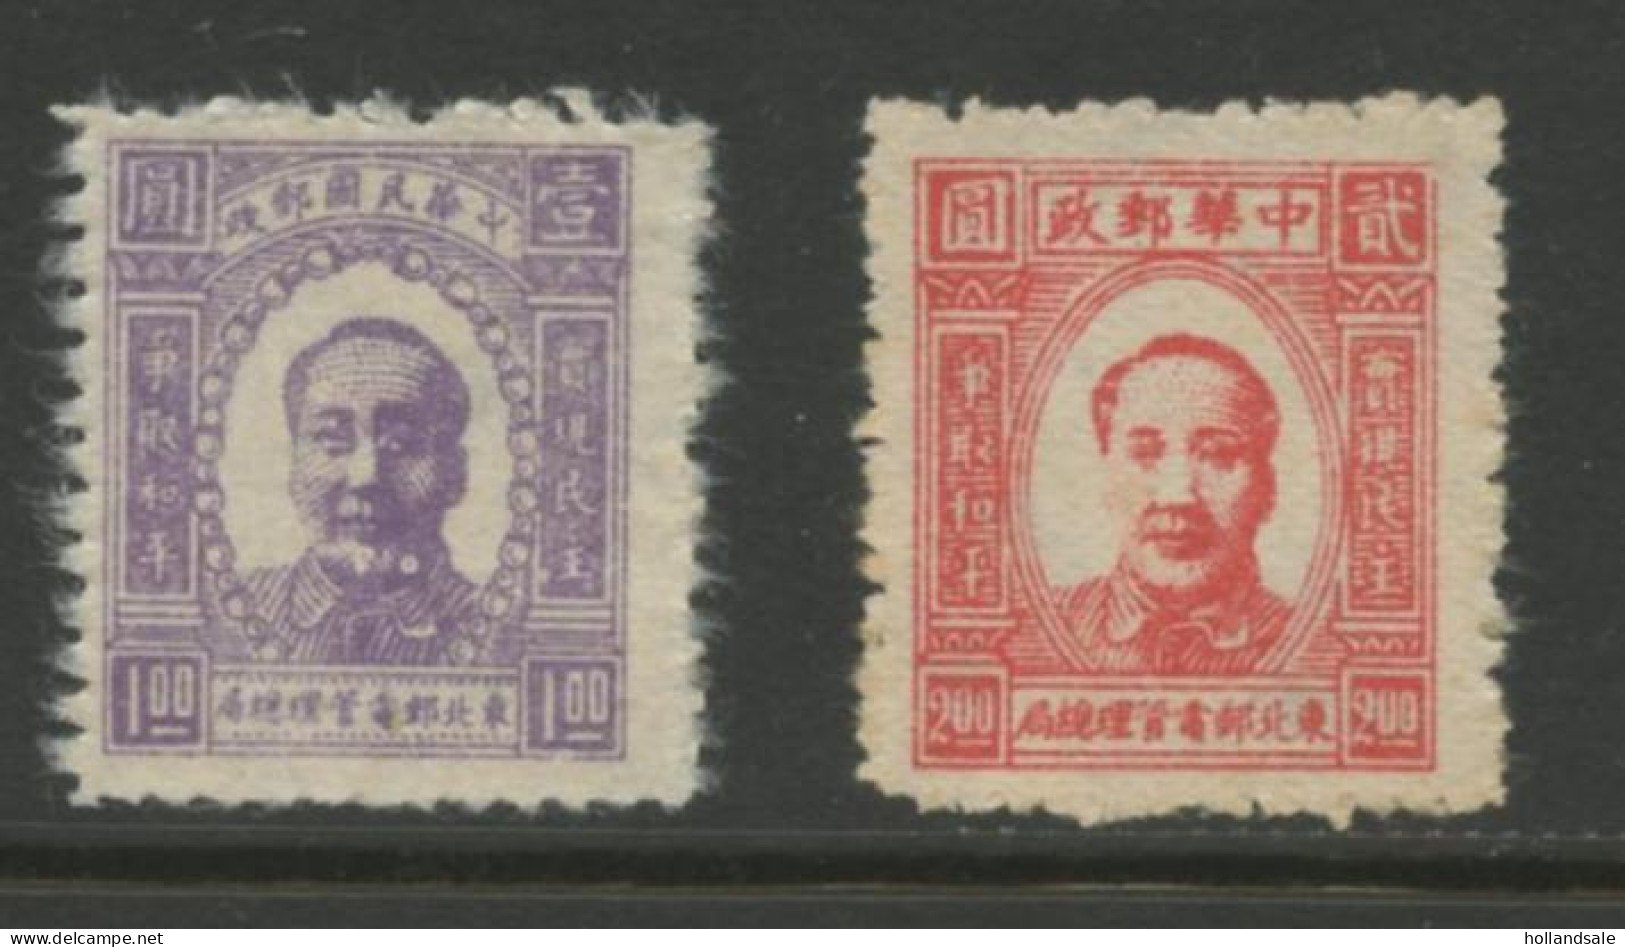 CHINA NORTH EAST - 1946 MICHEL # 1 And # 2. Both Unused. - North-Eastern 1946-48